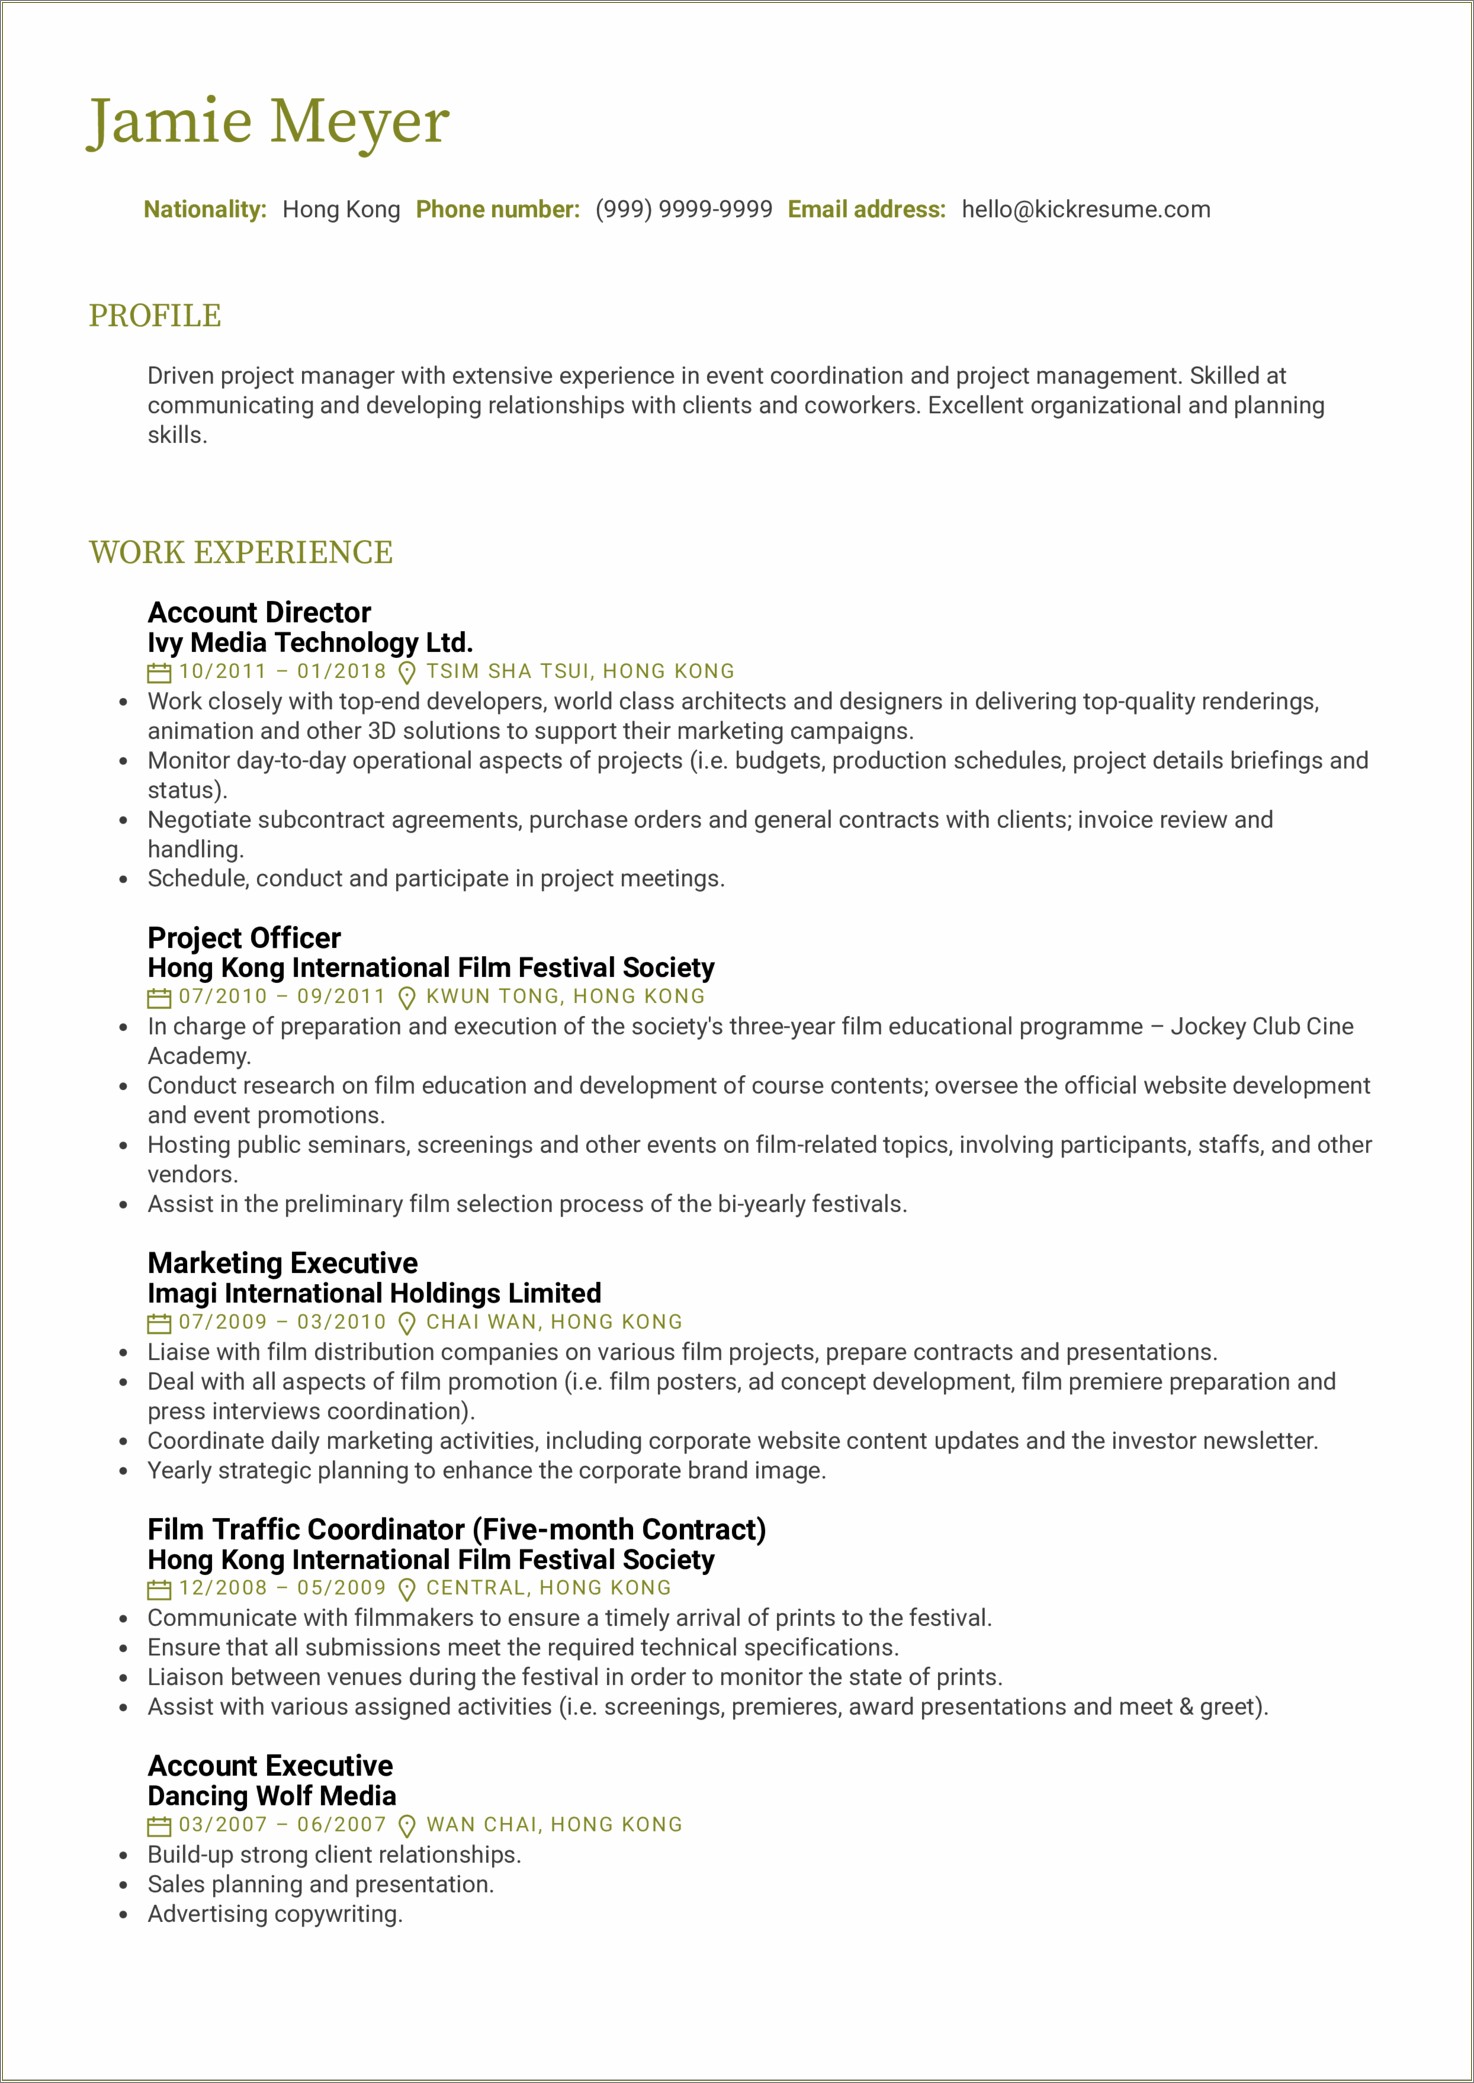 Good Resume For Technical Account Manager